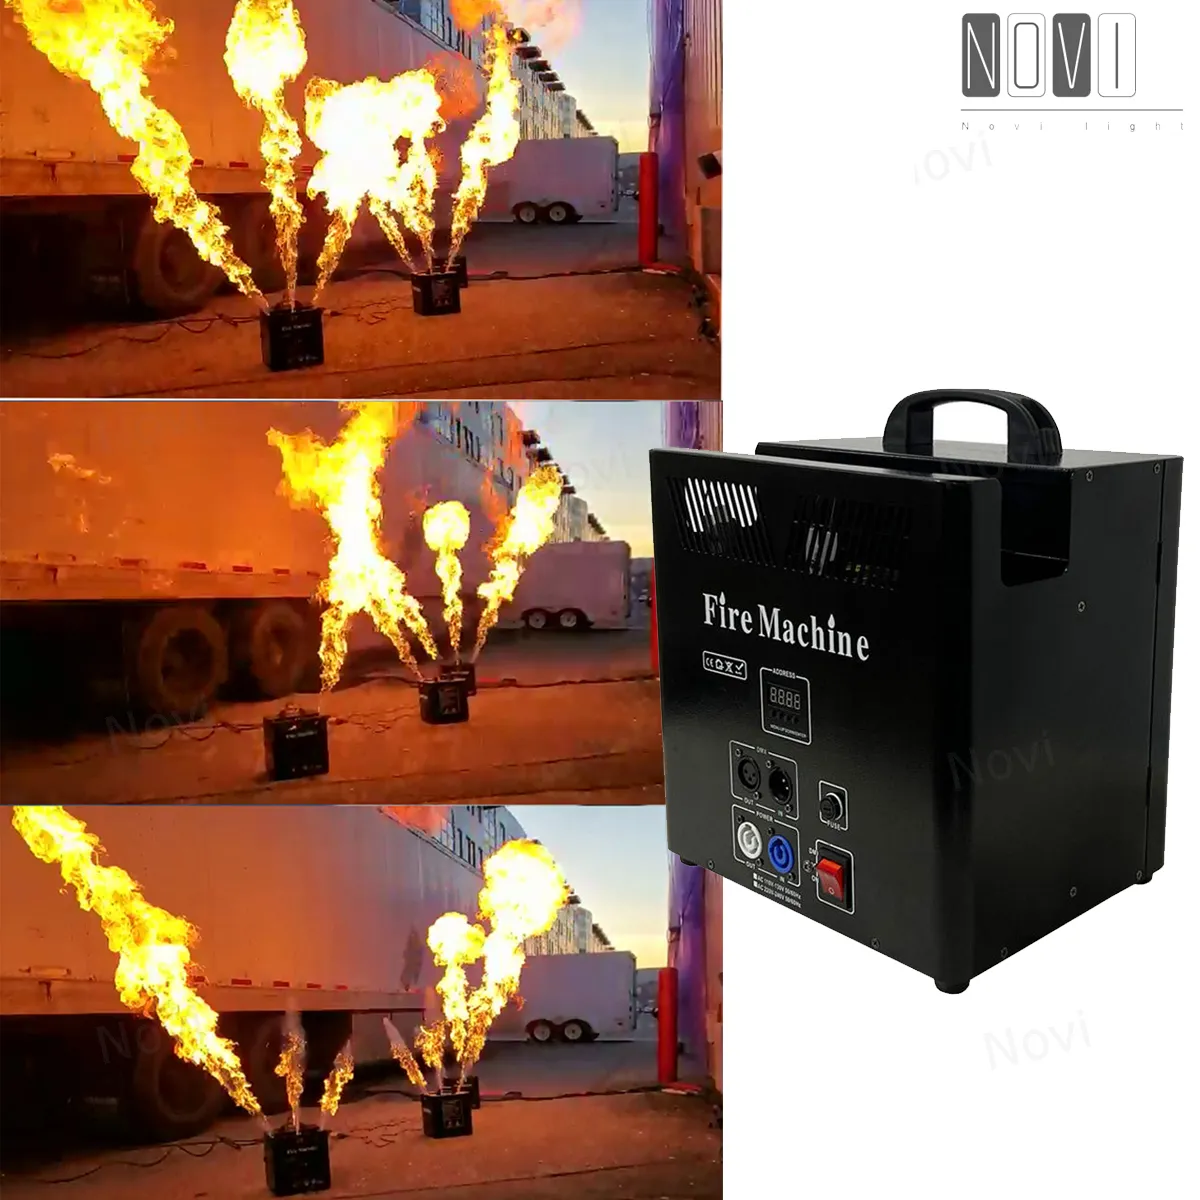 3 Heads Spray Jet Flame Thrower Real Fire Machine con DMX512 Controllo manuale per Wedding Stage Theater Party Club Disco DJ